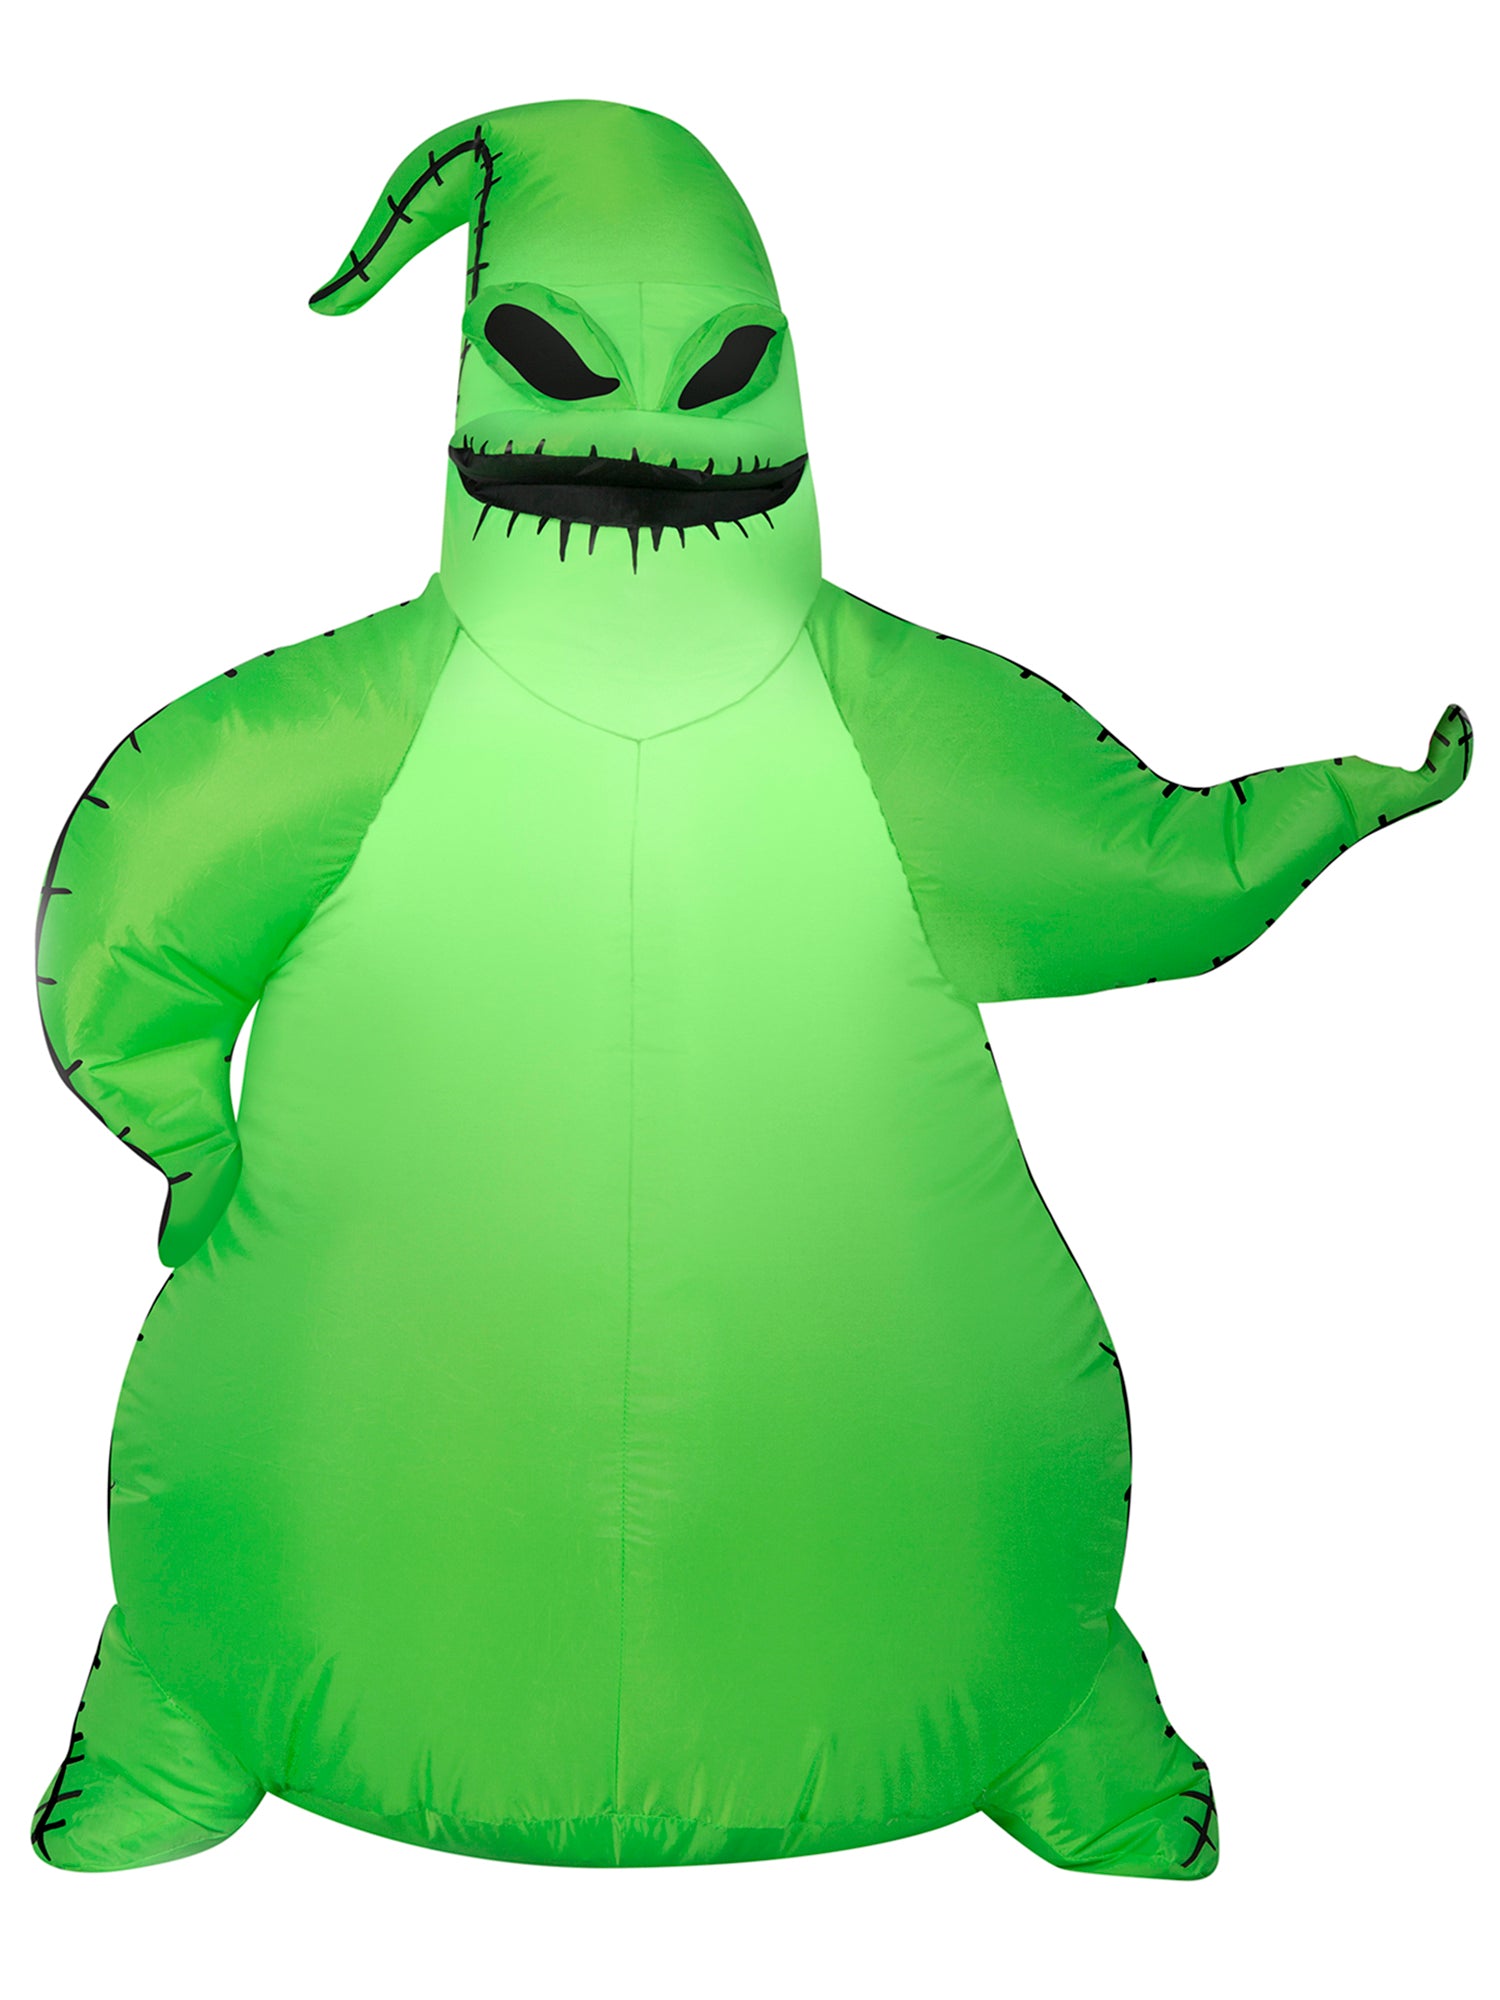 3.5 Foot The Nightmare Before Christmas Green Oogie Boogie Light Up Halloween Inflatable Lawn Decor - costumes.com